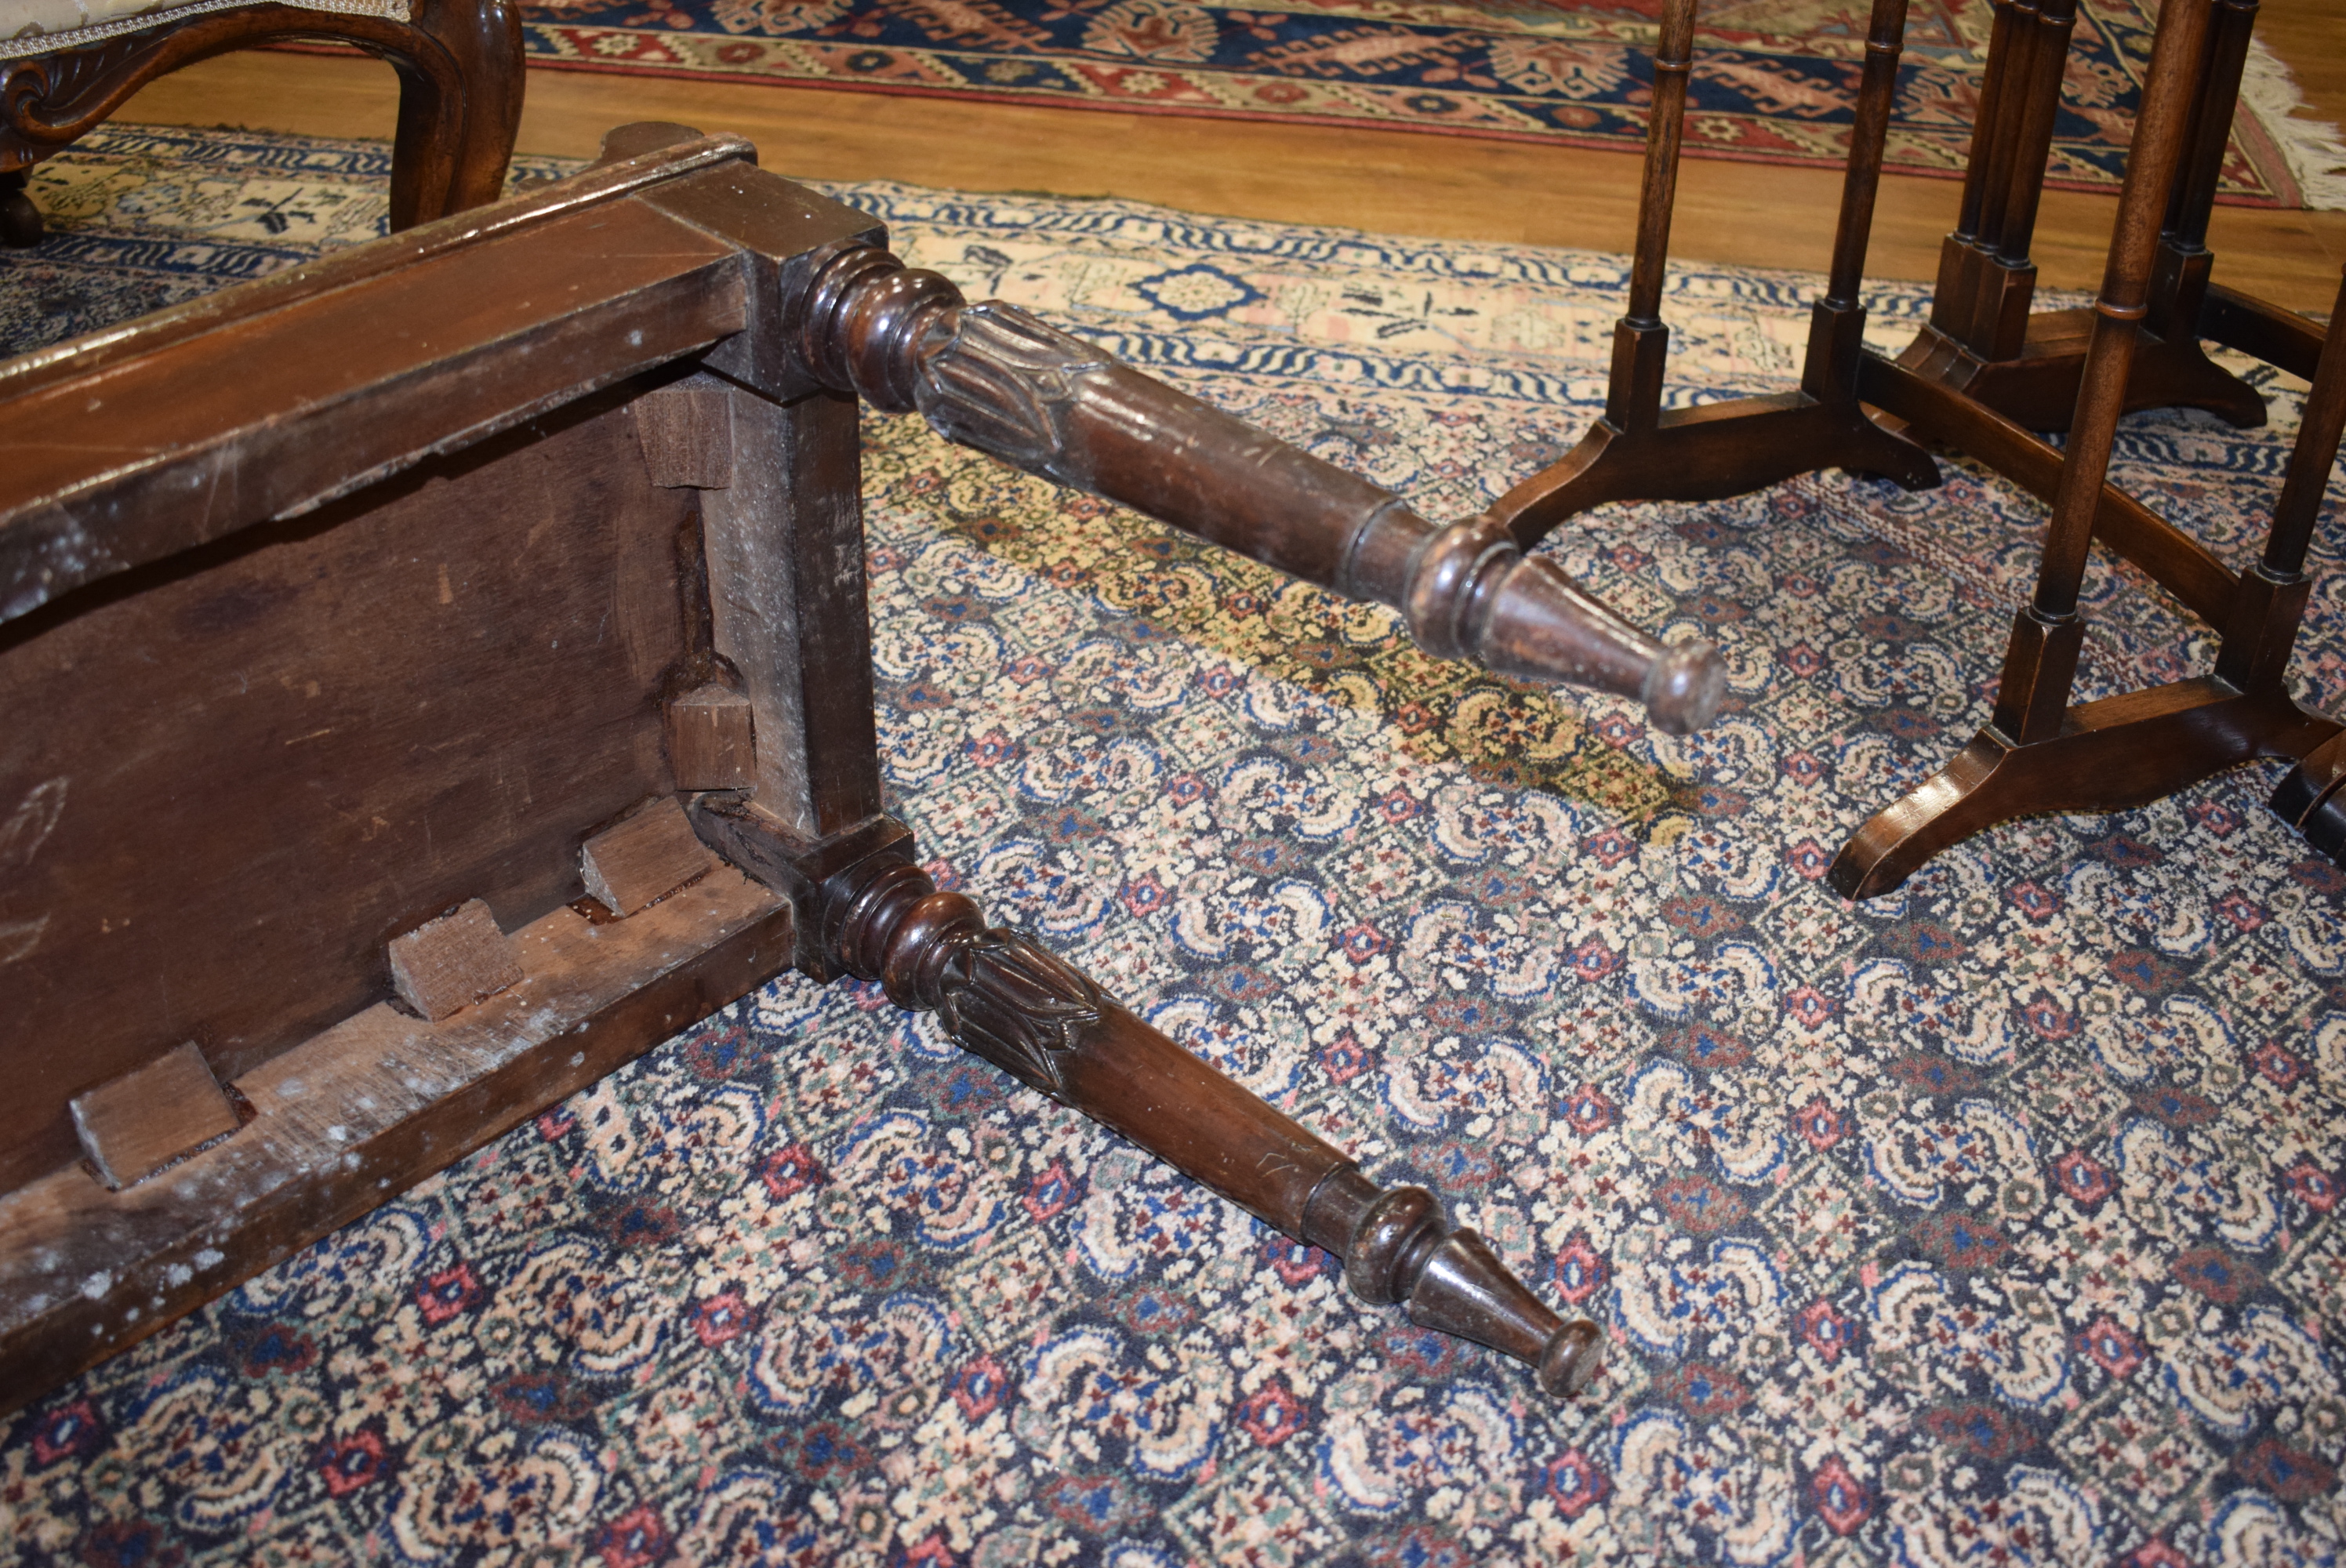 A late 19th century mahogany window seat with scrolled ends and turned legs with acanthus-leaf caps - Image 8 of 20